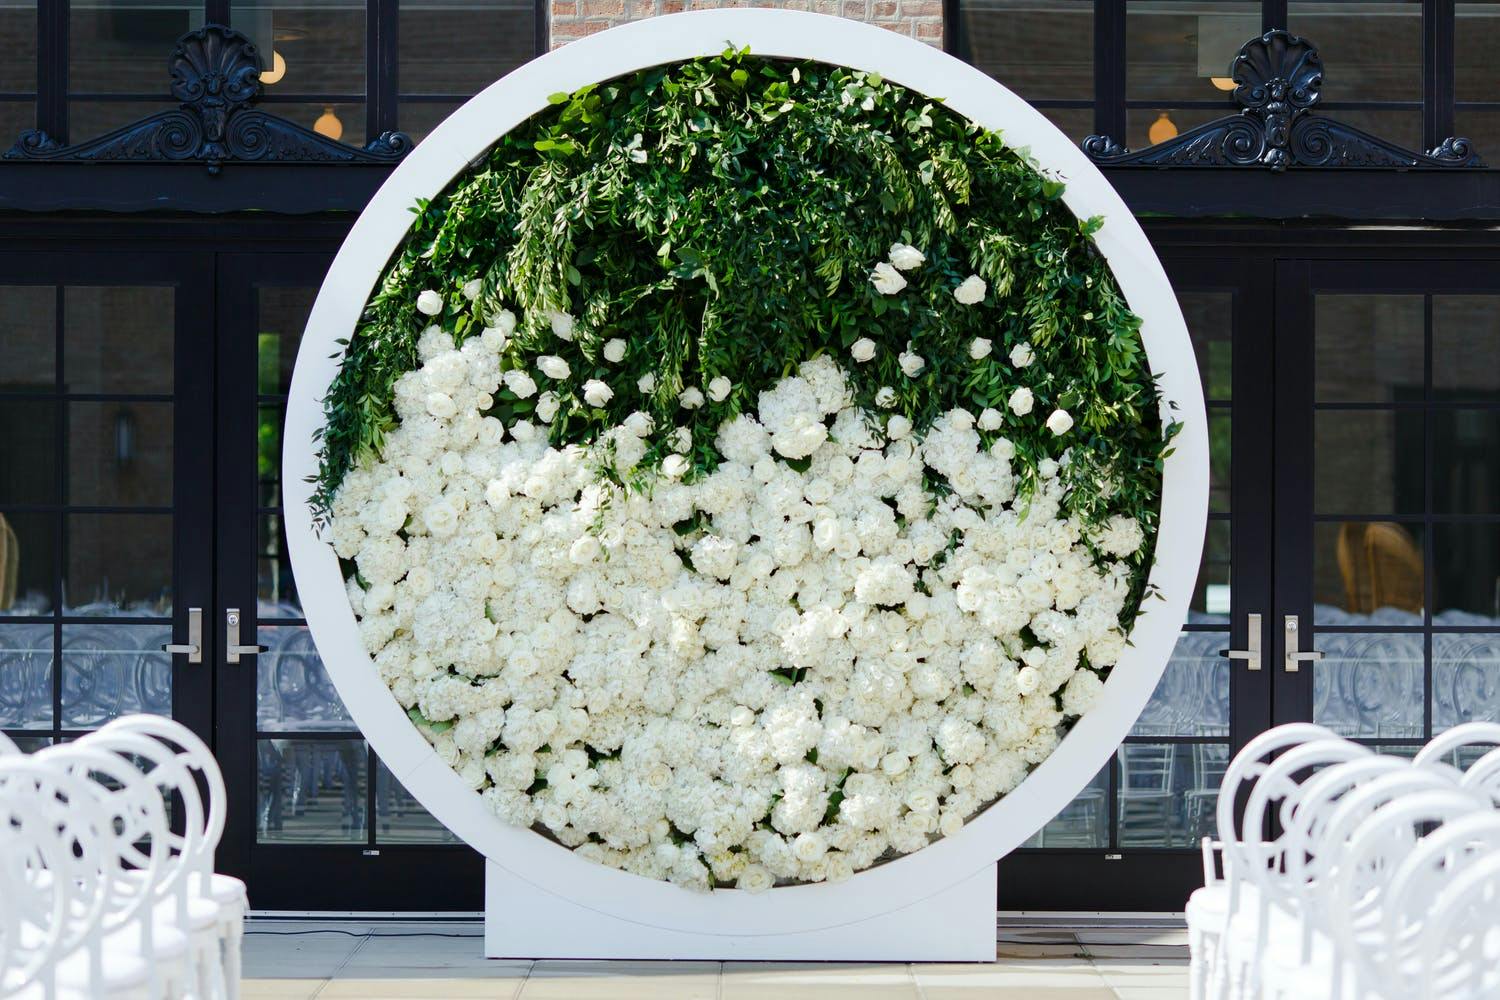 Modern Circular Wedding Arch Filled With Half Greenery and Half White Flowers | PartySlate